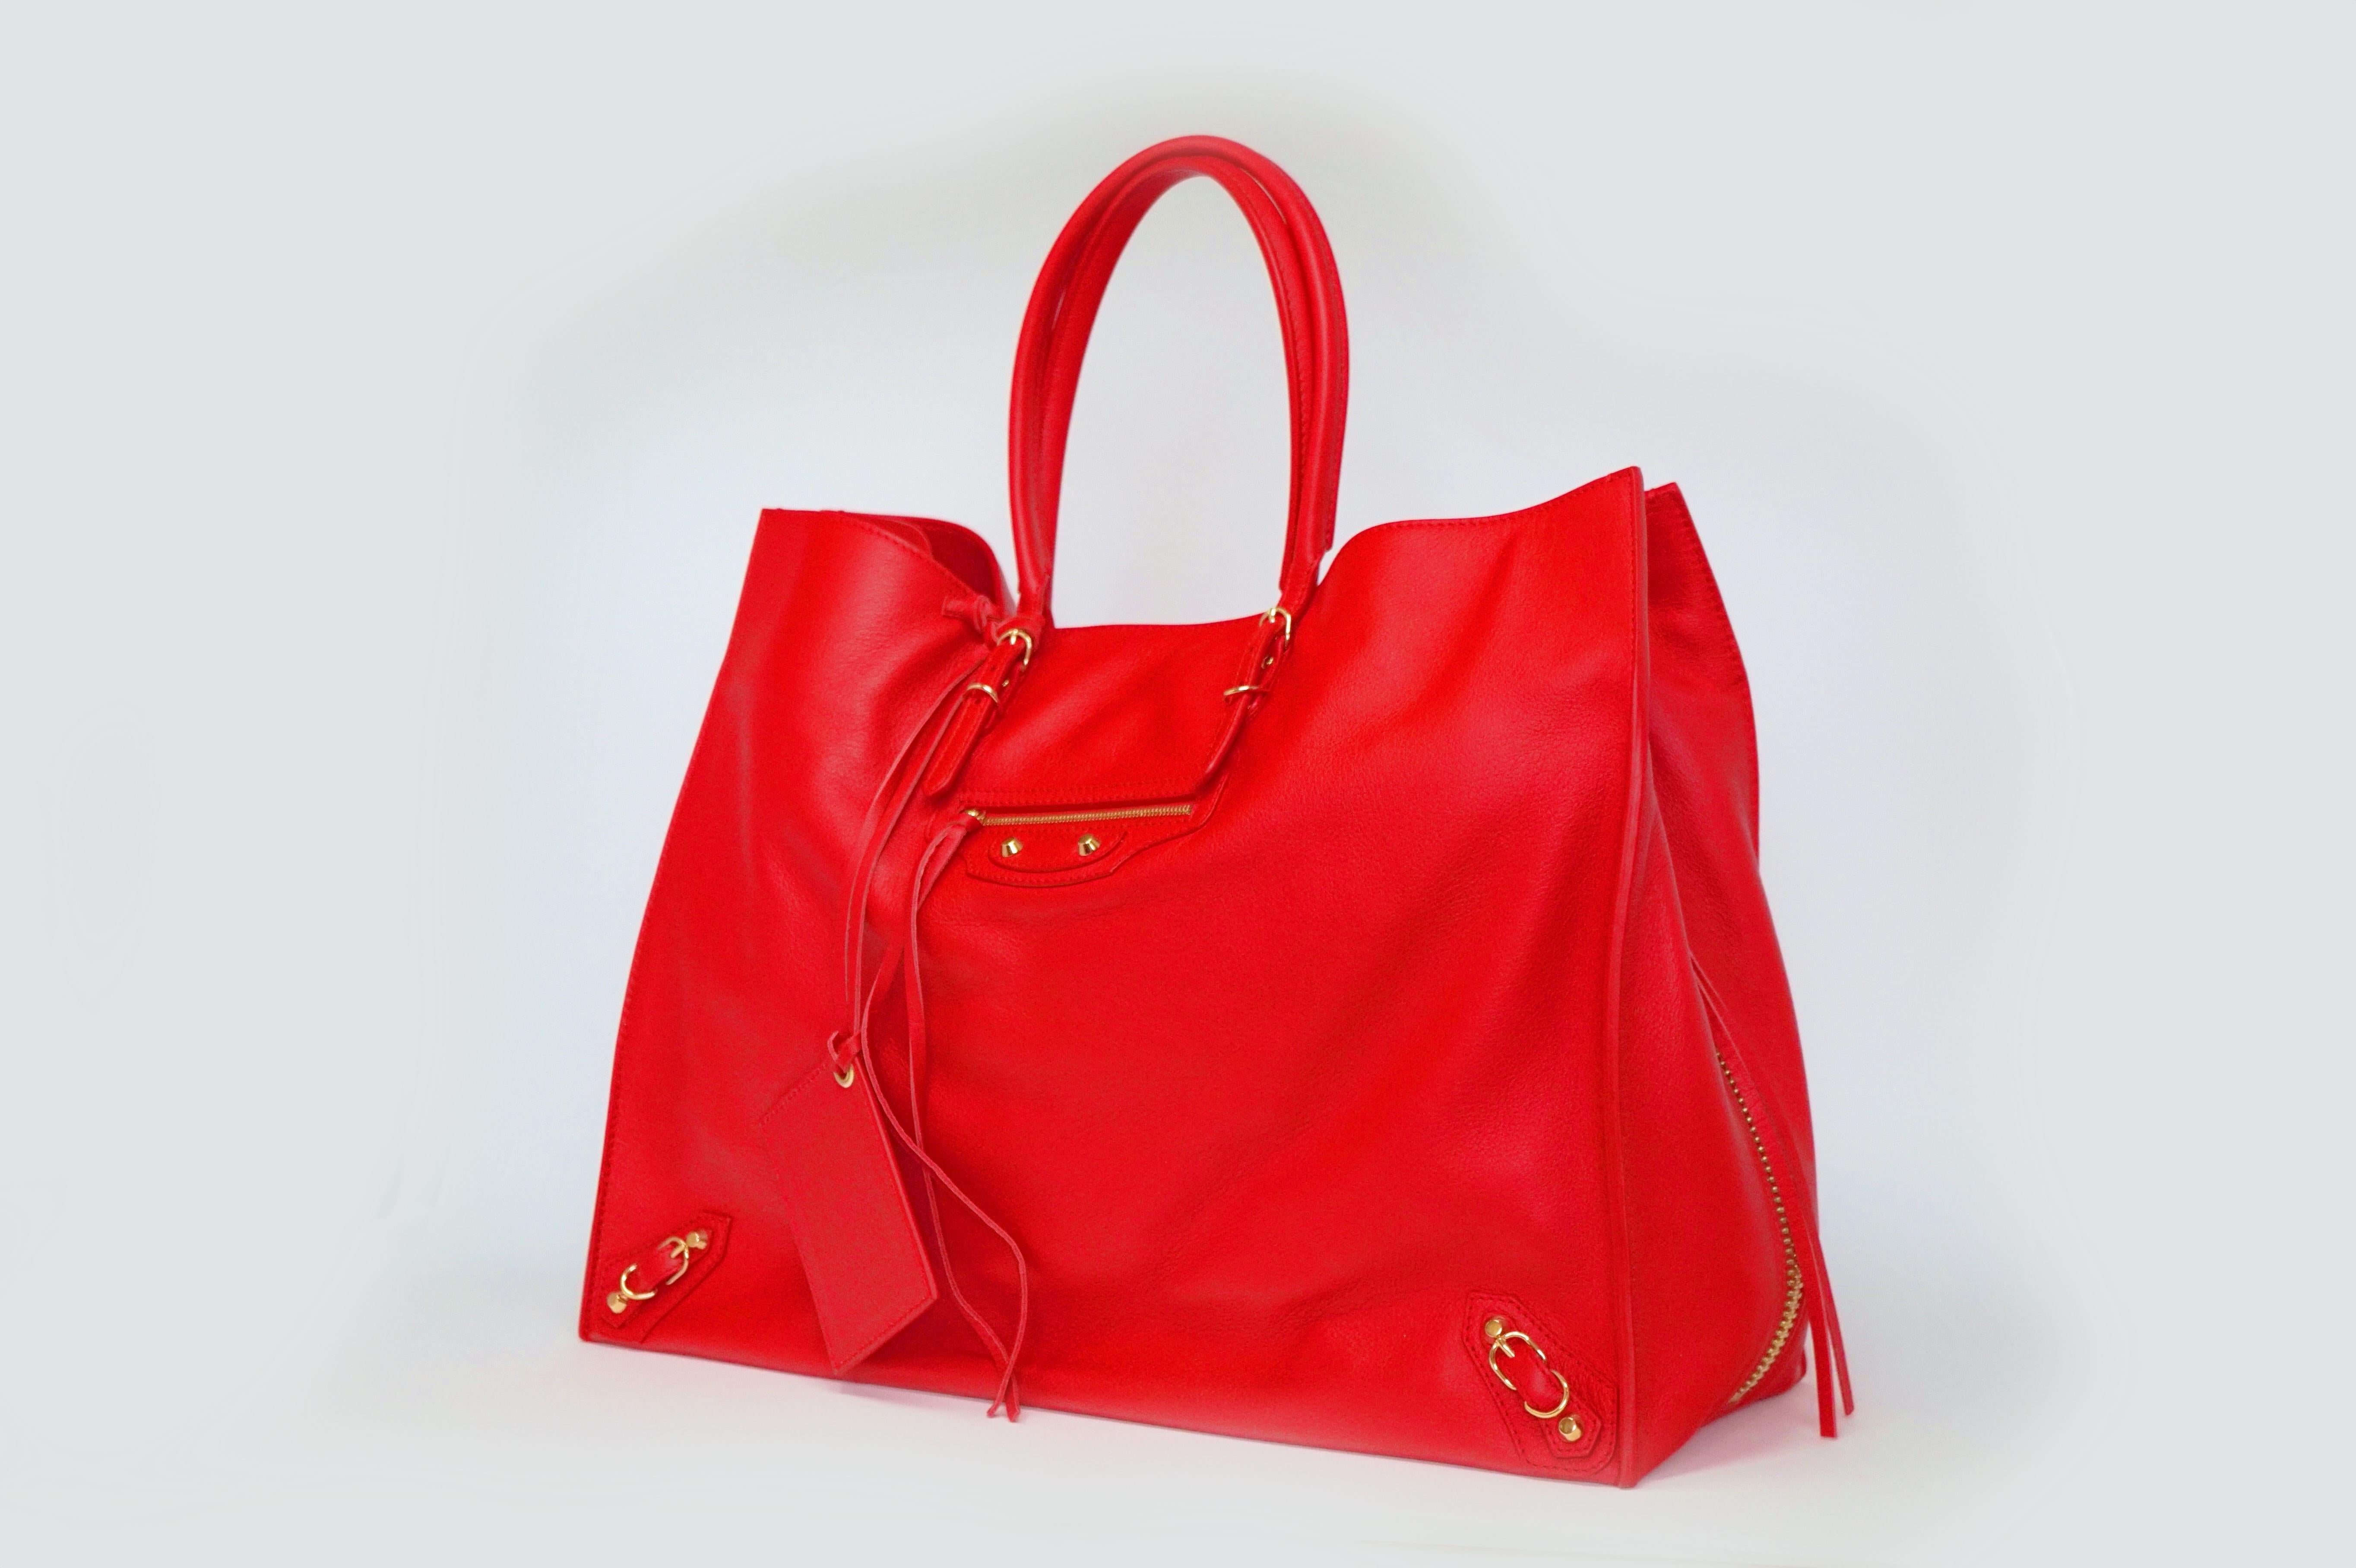 Balenciaga Papier A4 Zip-Around Tote in Red Calfskin Leather, Fall/Winter 2016   1